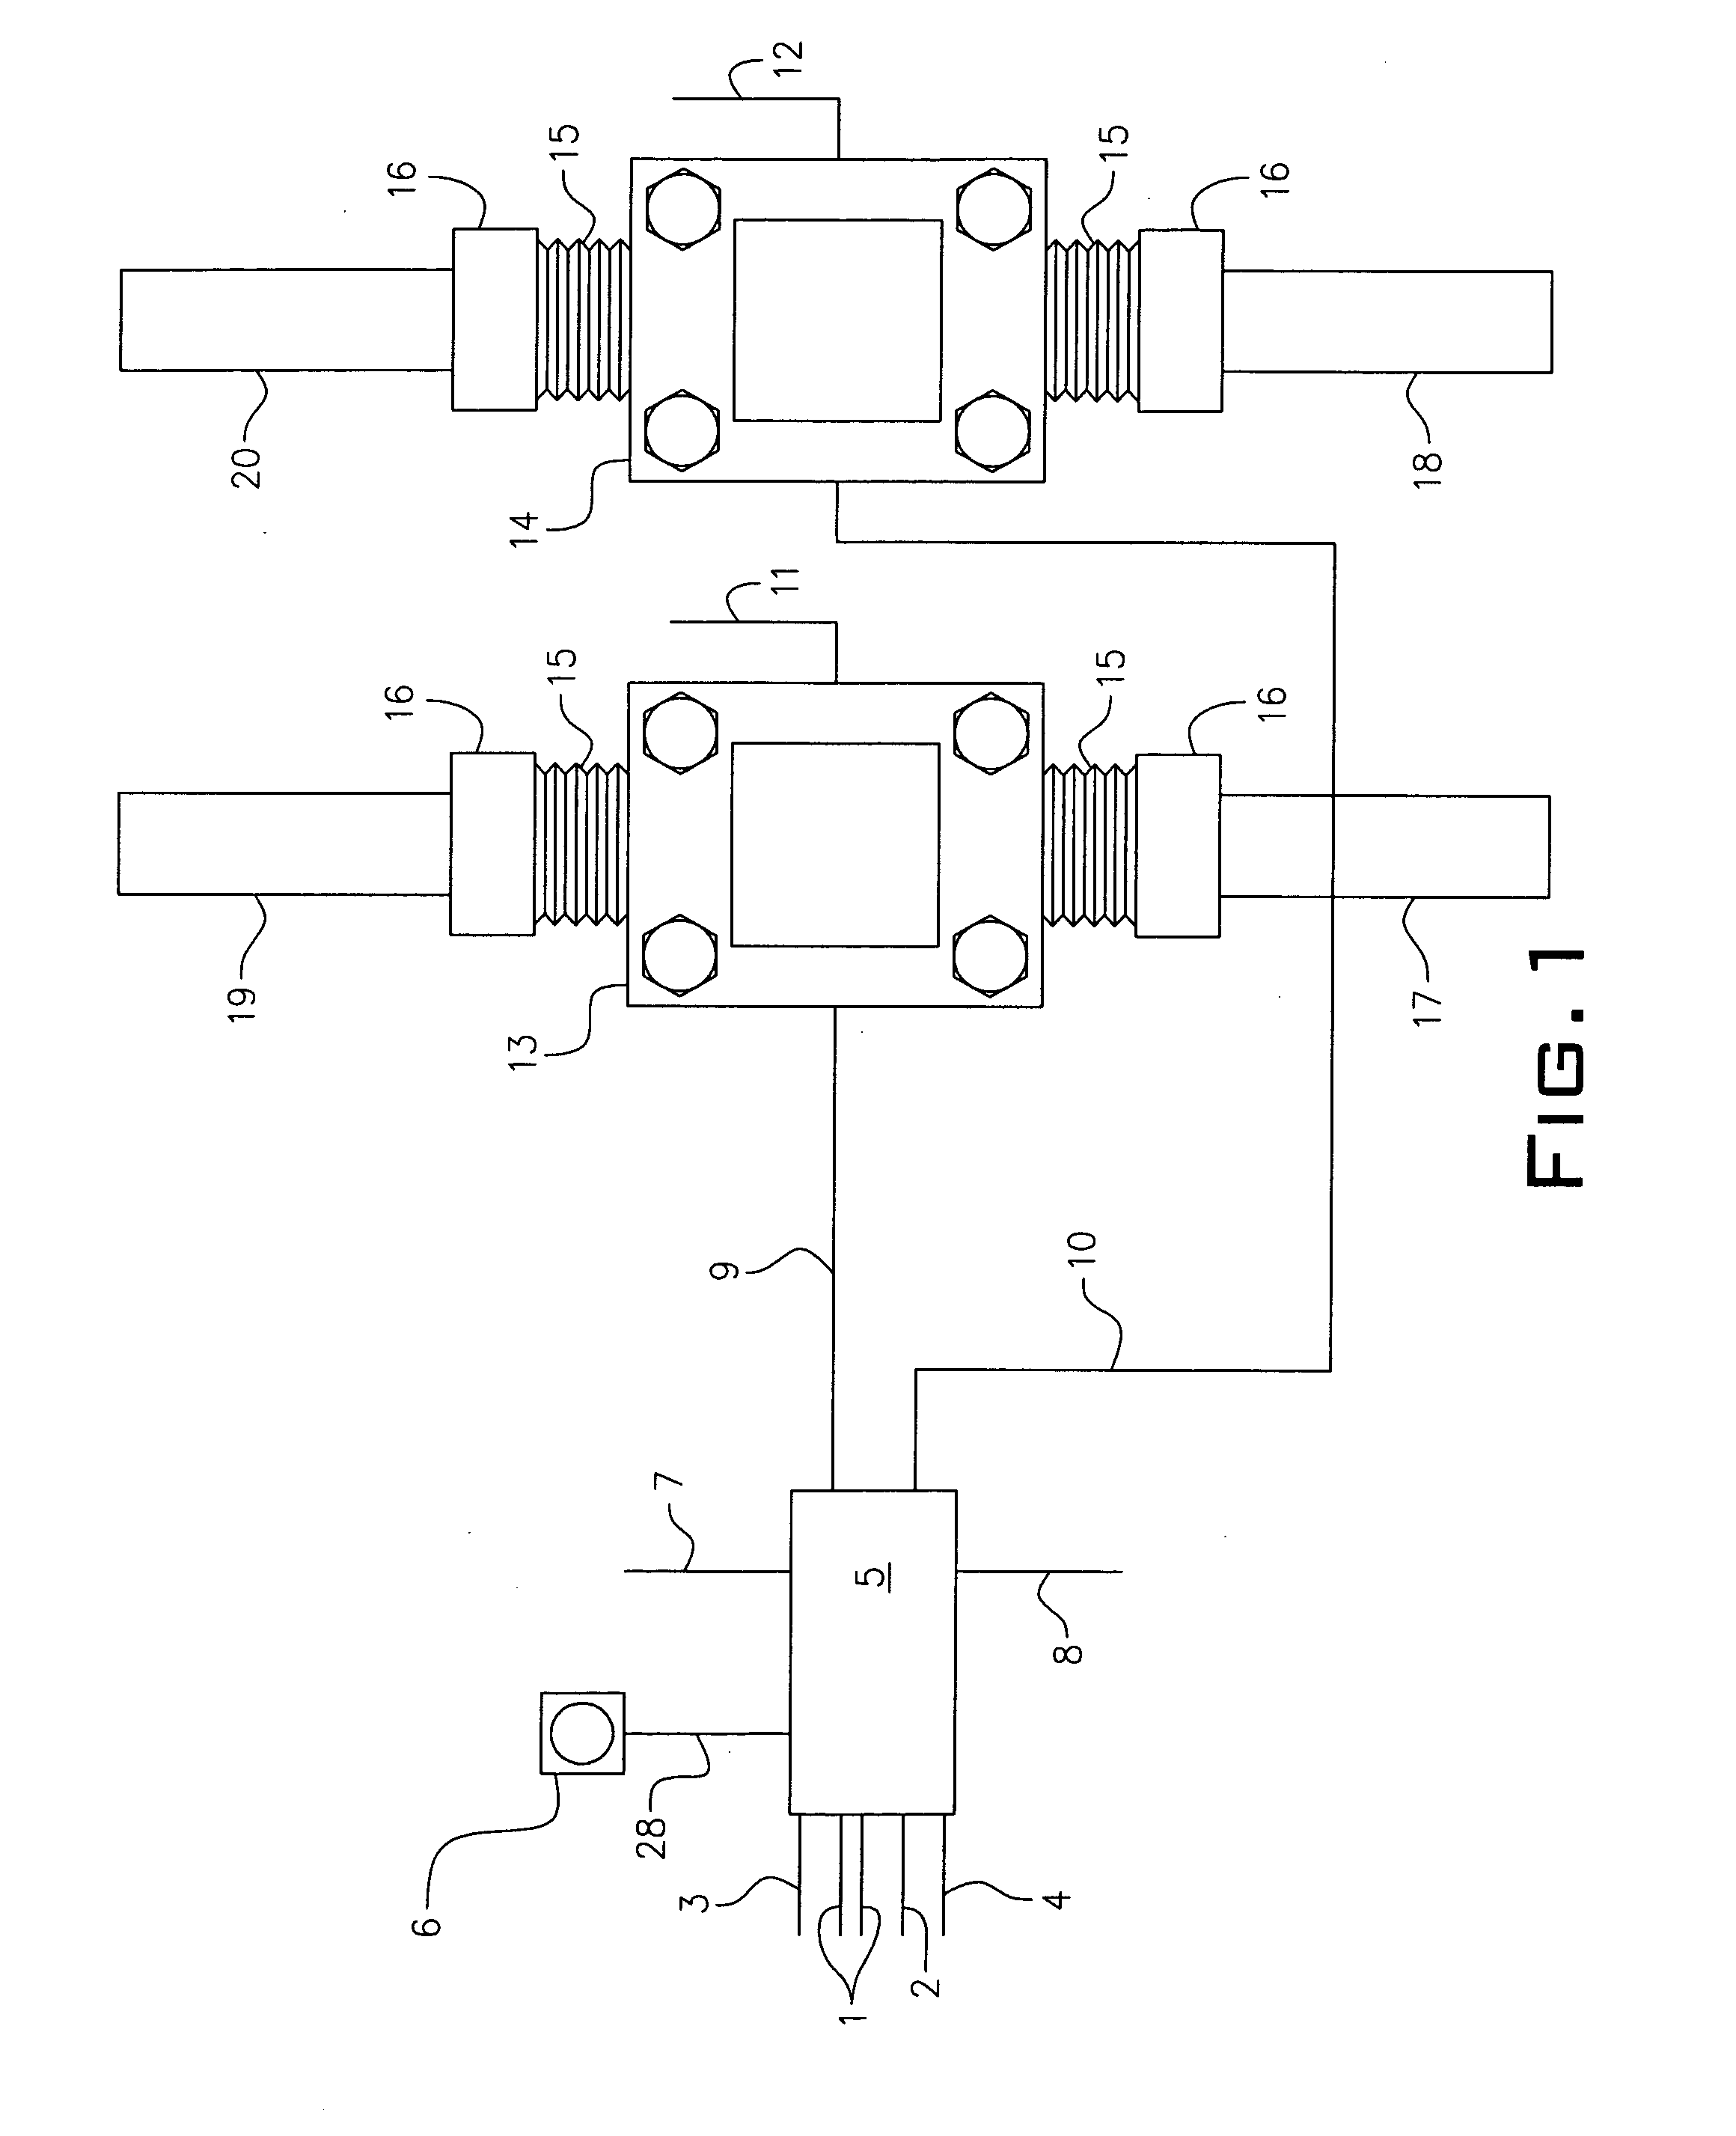 Apparatus and system for automatic activation and de-activation of water flow